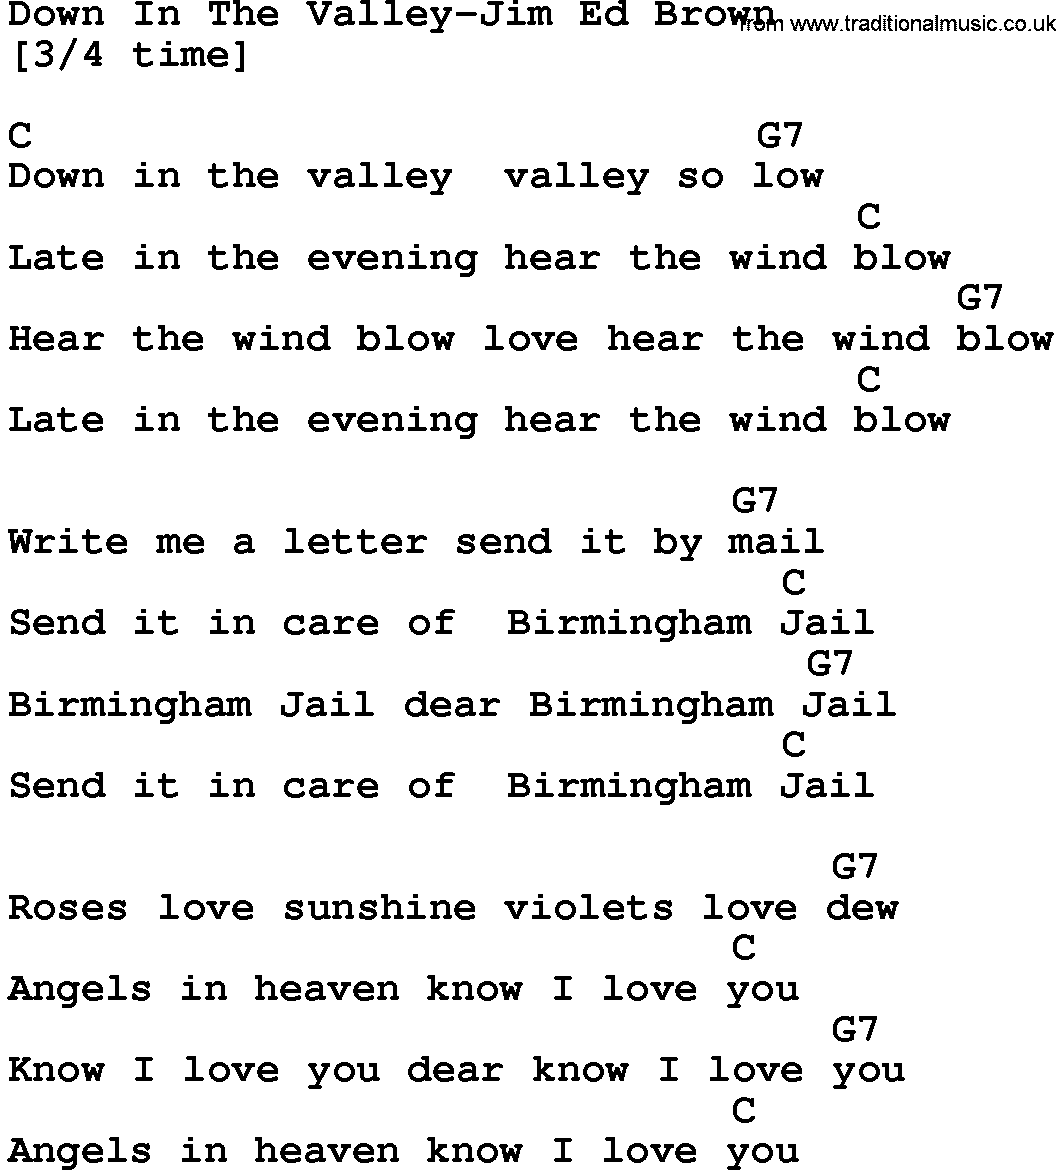 Country music song: Down In The Valley-Jim Ed Brown lyrics and chords